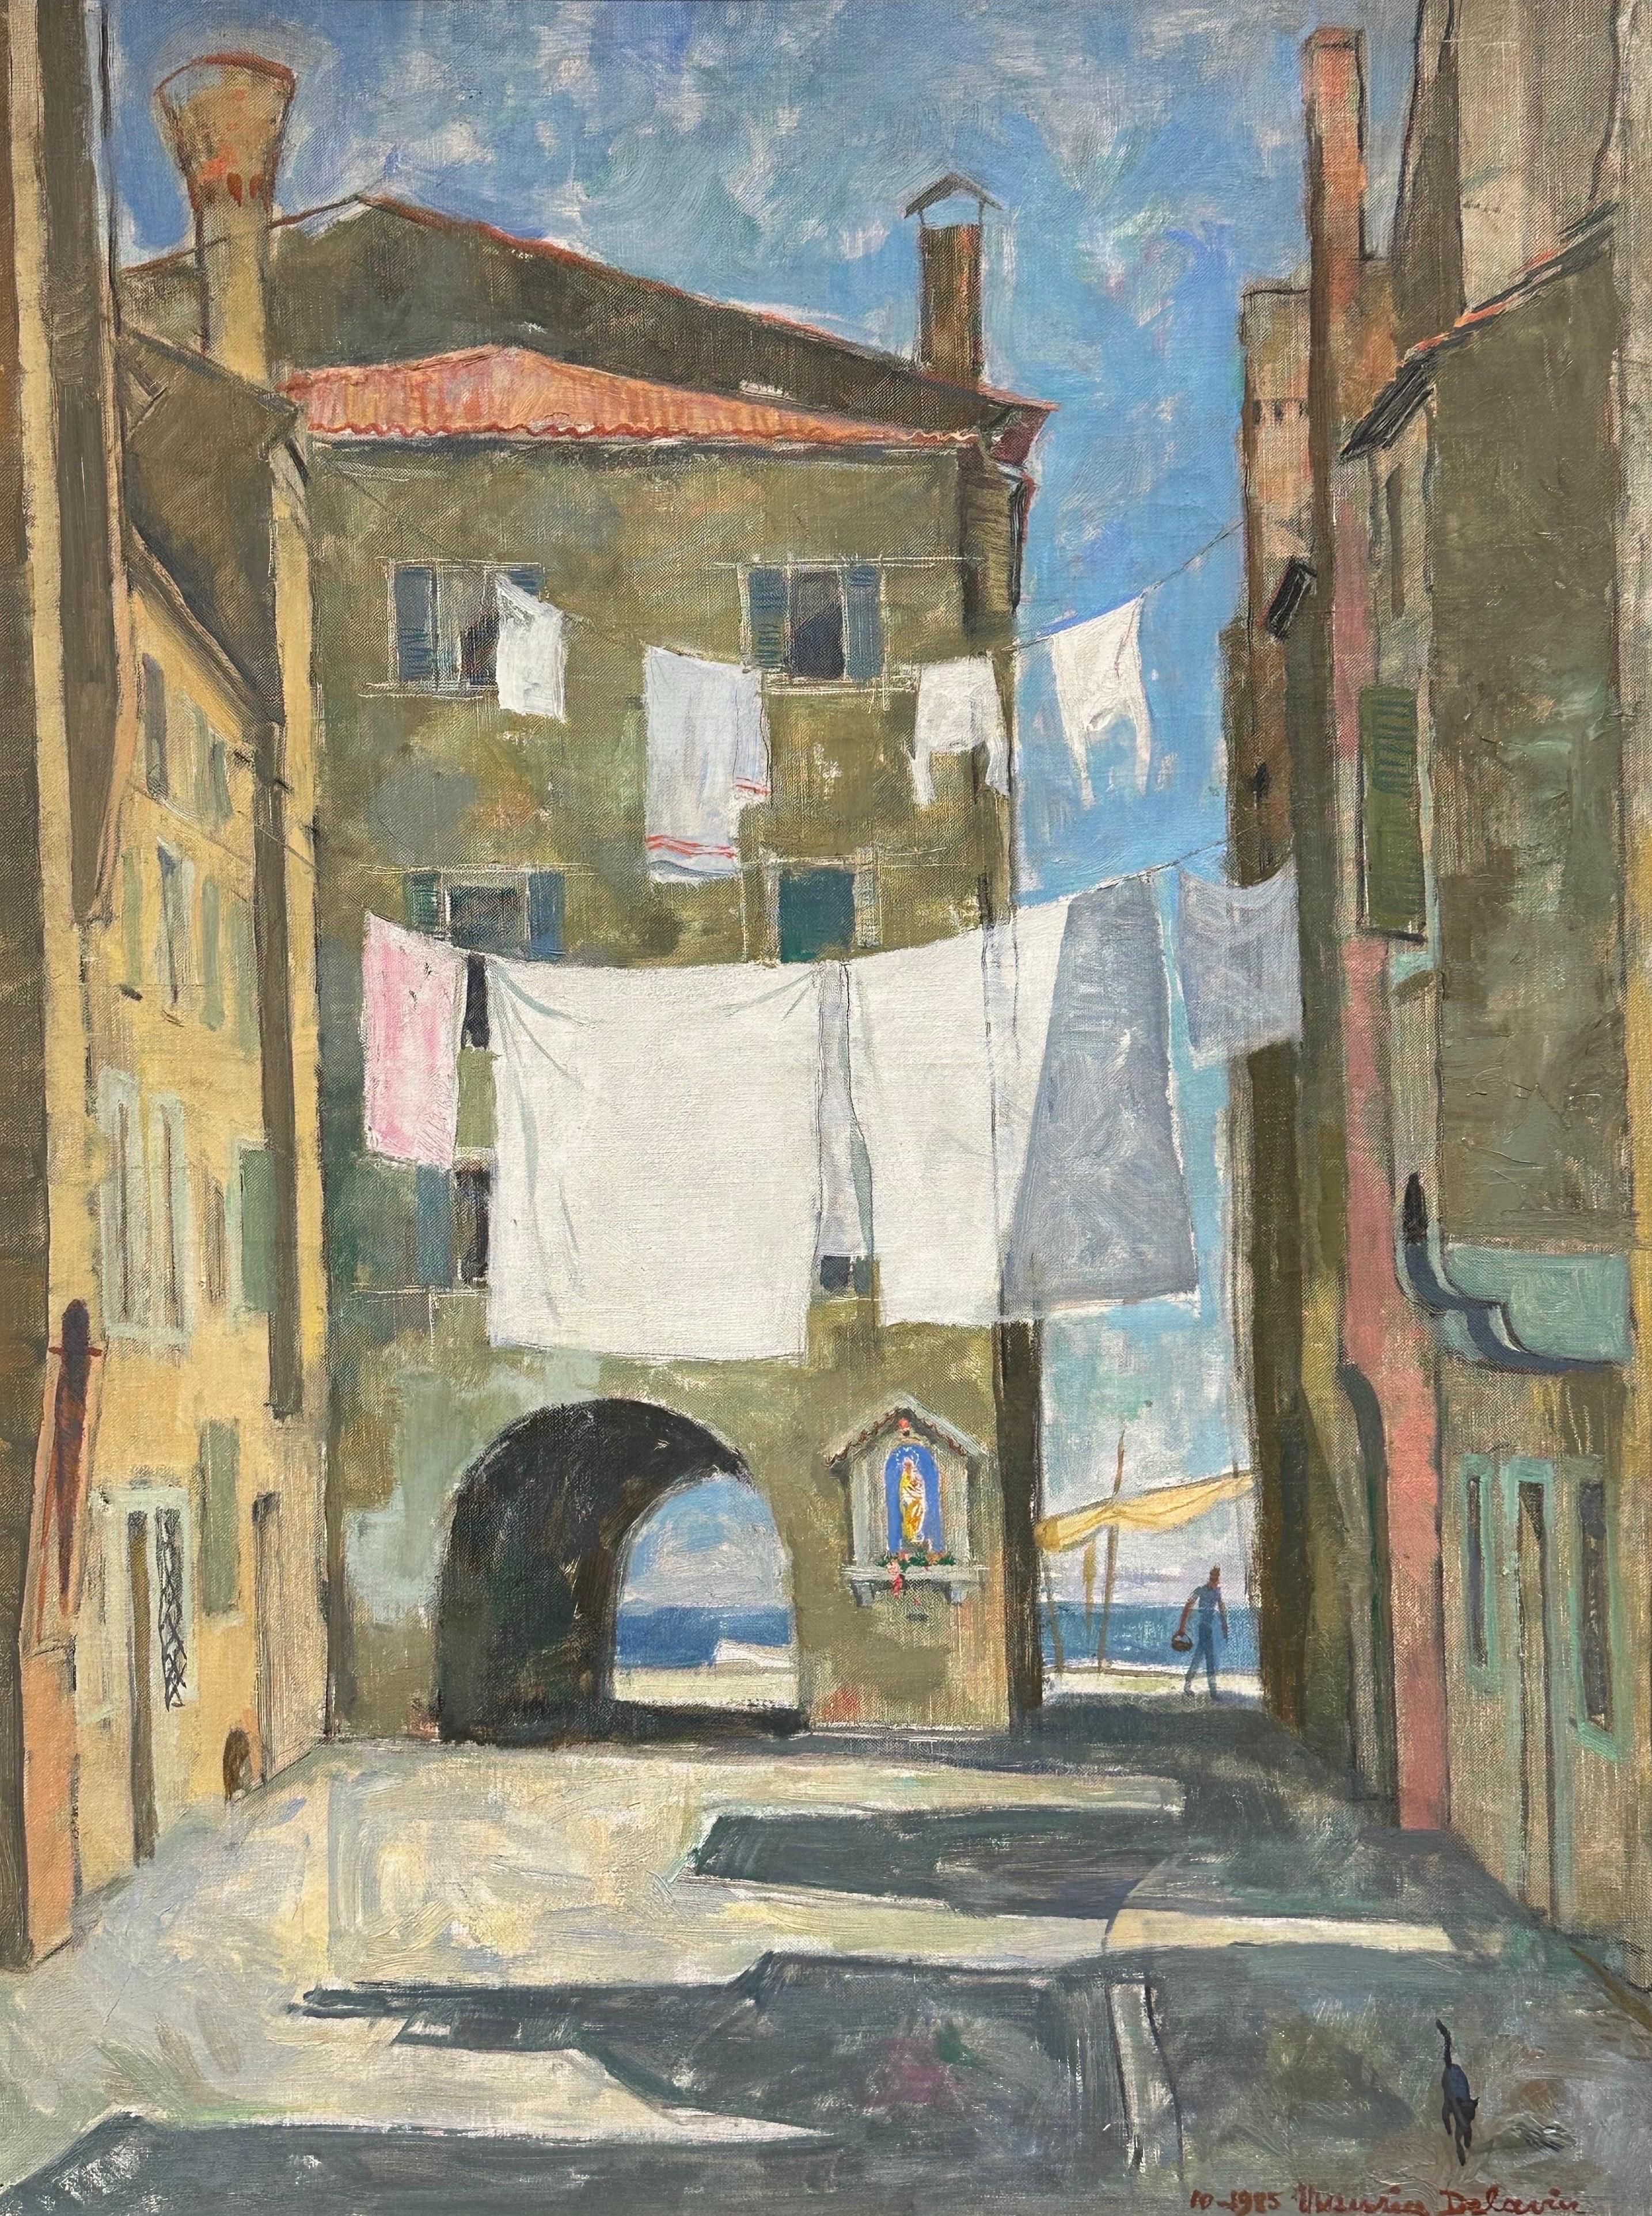 French Impressionist Oil Painting Clothes Drying Washing Line Venice Courtyard - Gray Landscape Painting by Maurice Delavier